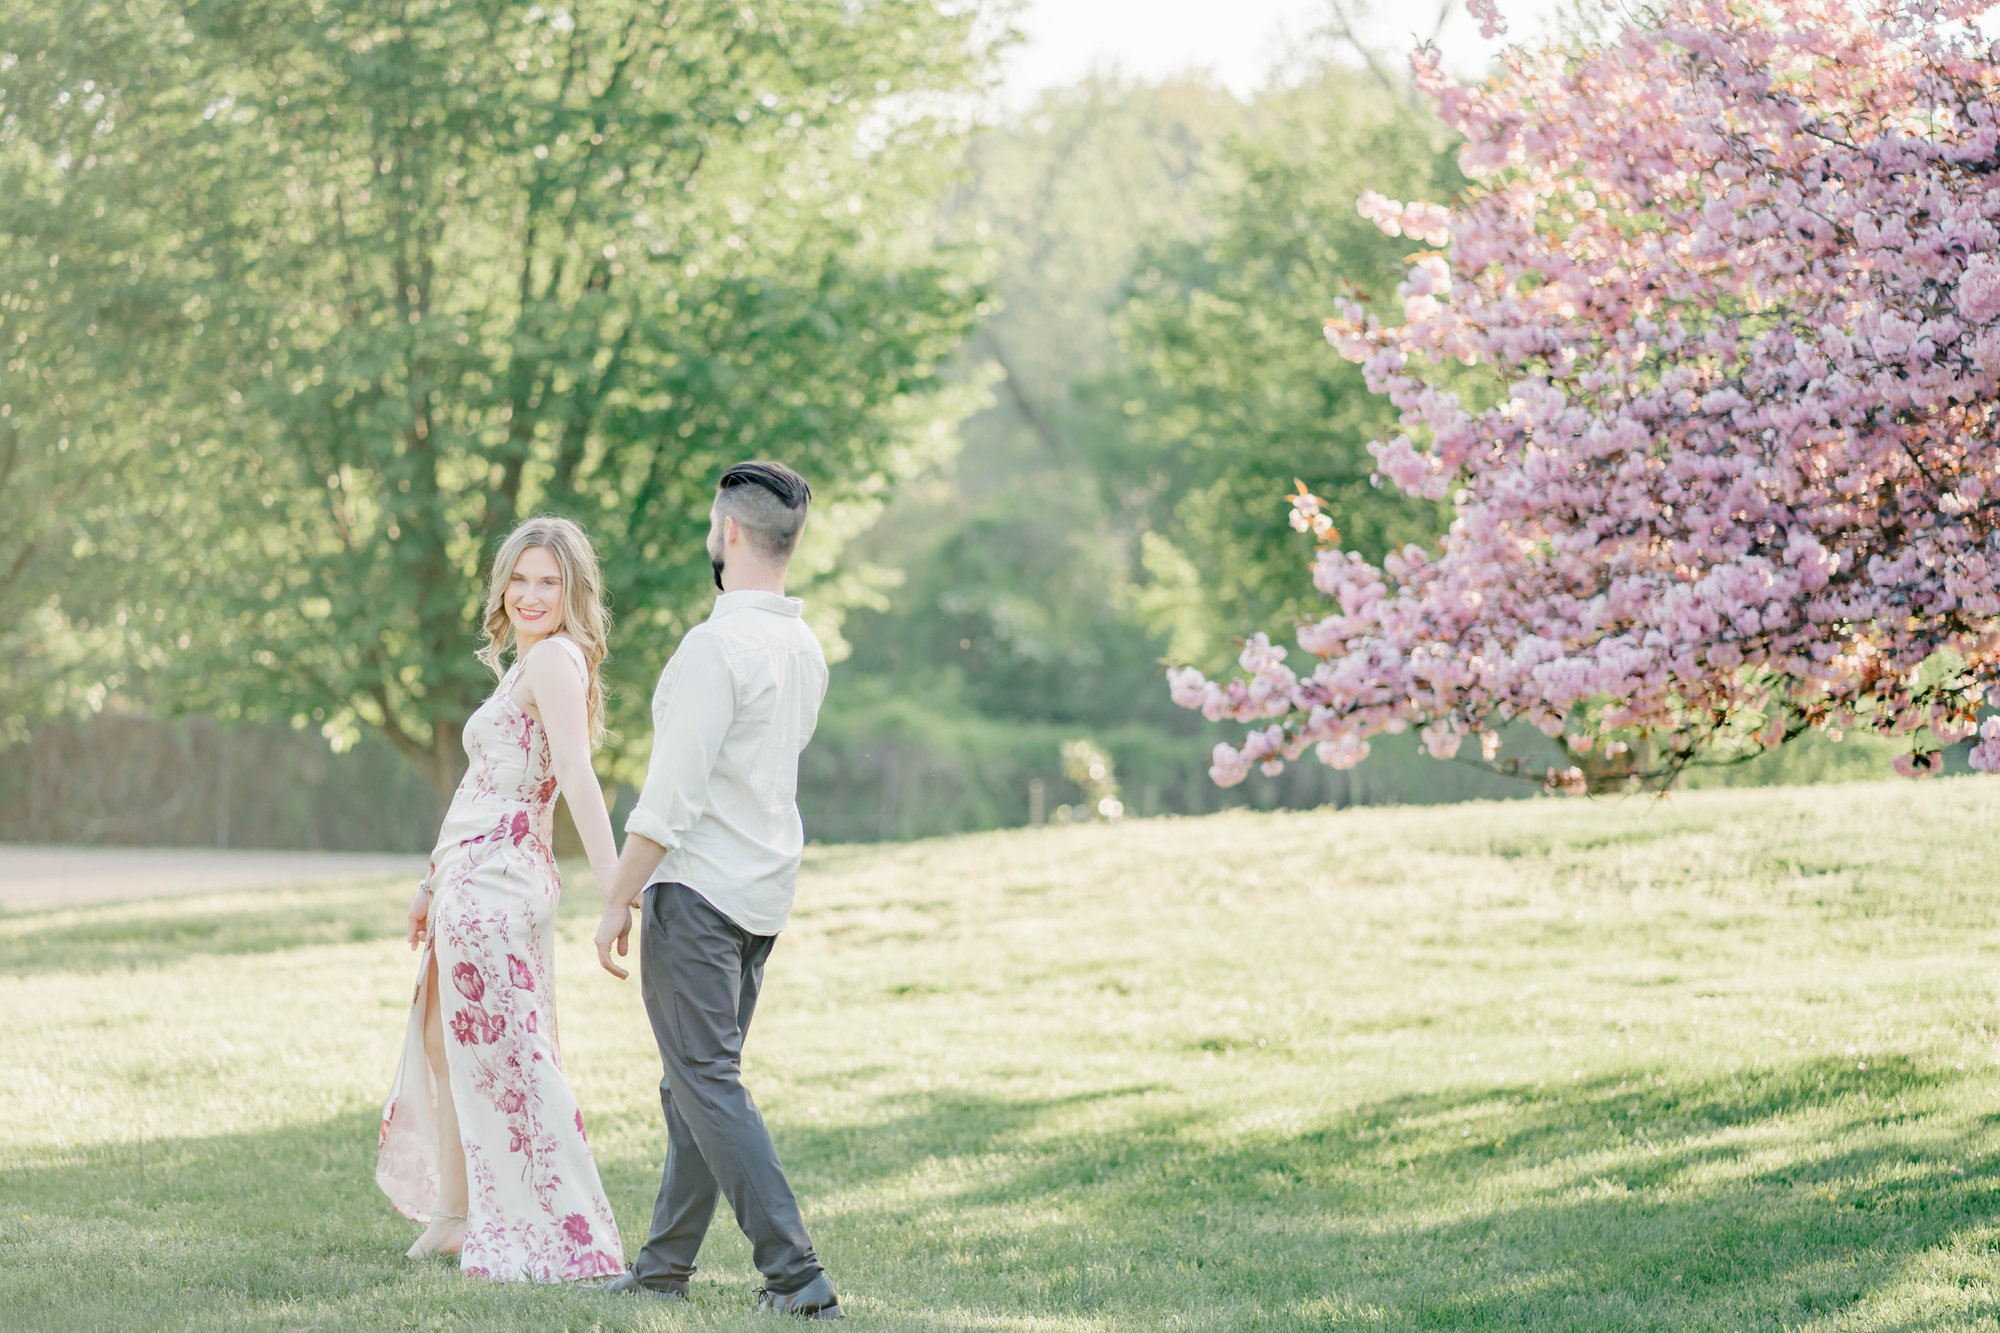 Couples engagement session at the United States National Arboretum captured by Stephanie Grooms Artistry